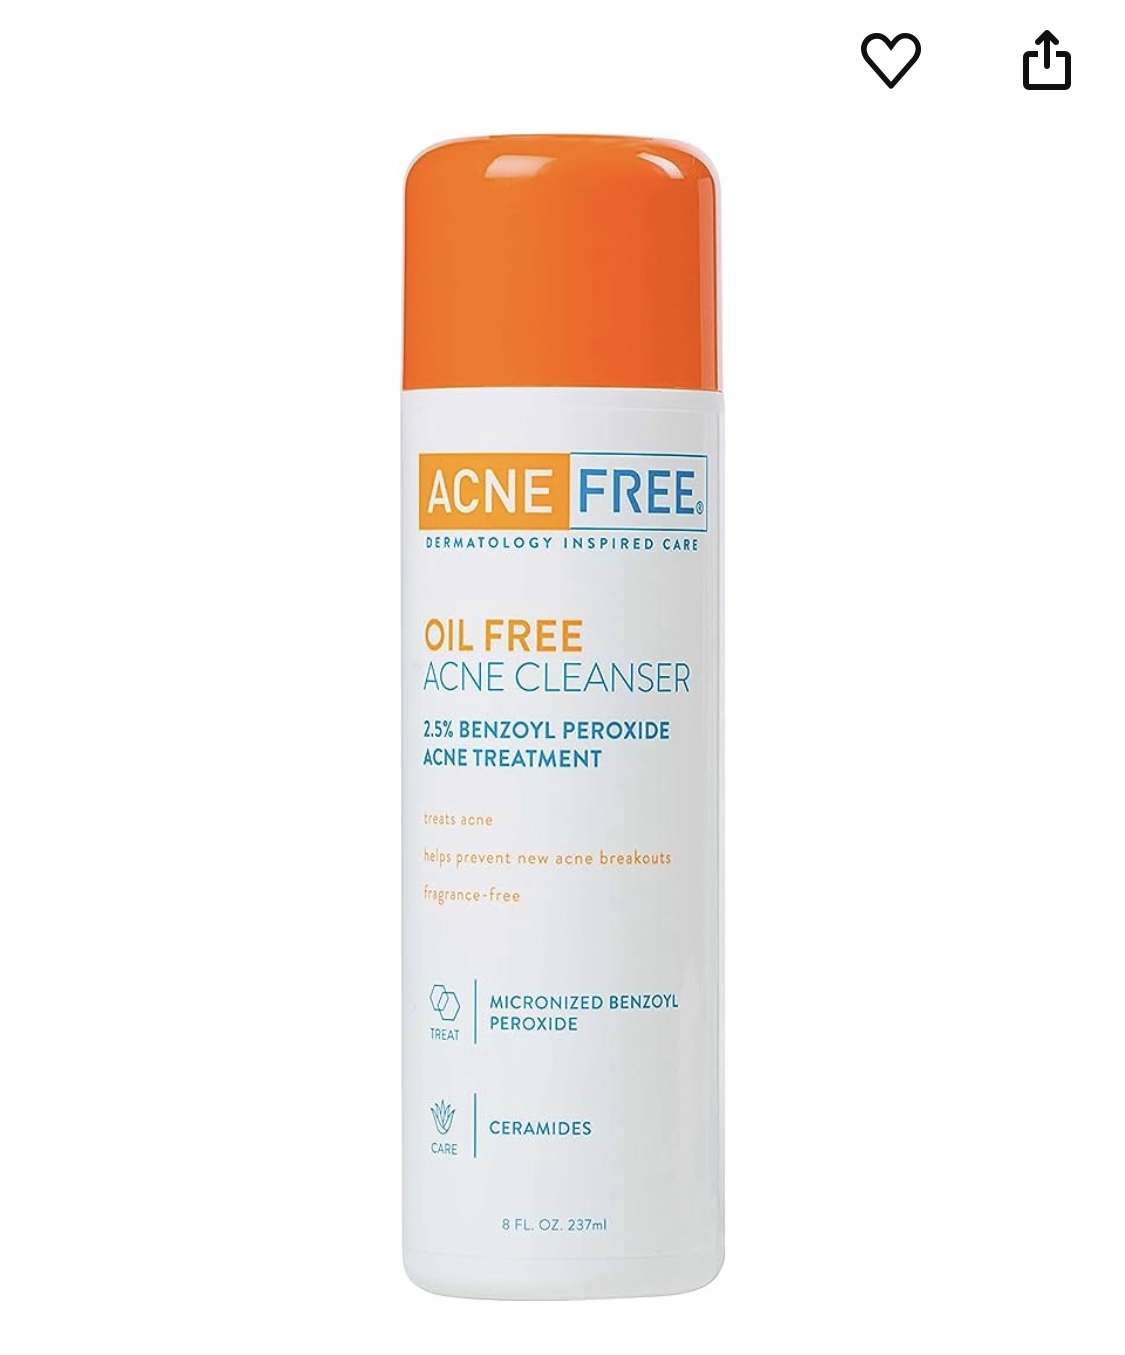 Acne Free Oil-Free Acne Cleanser with Benzoyl Peroxide 2.5%